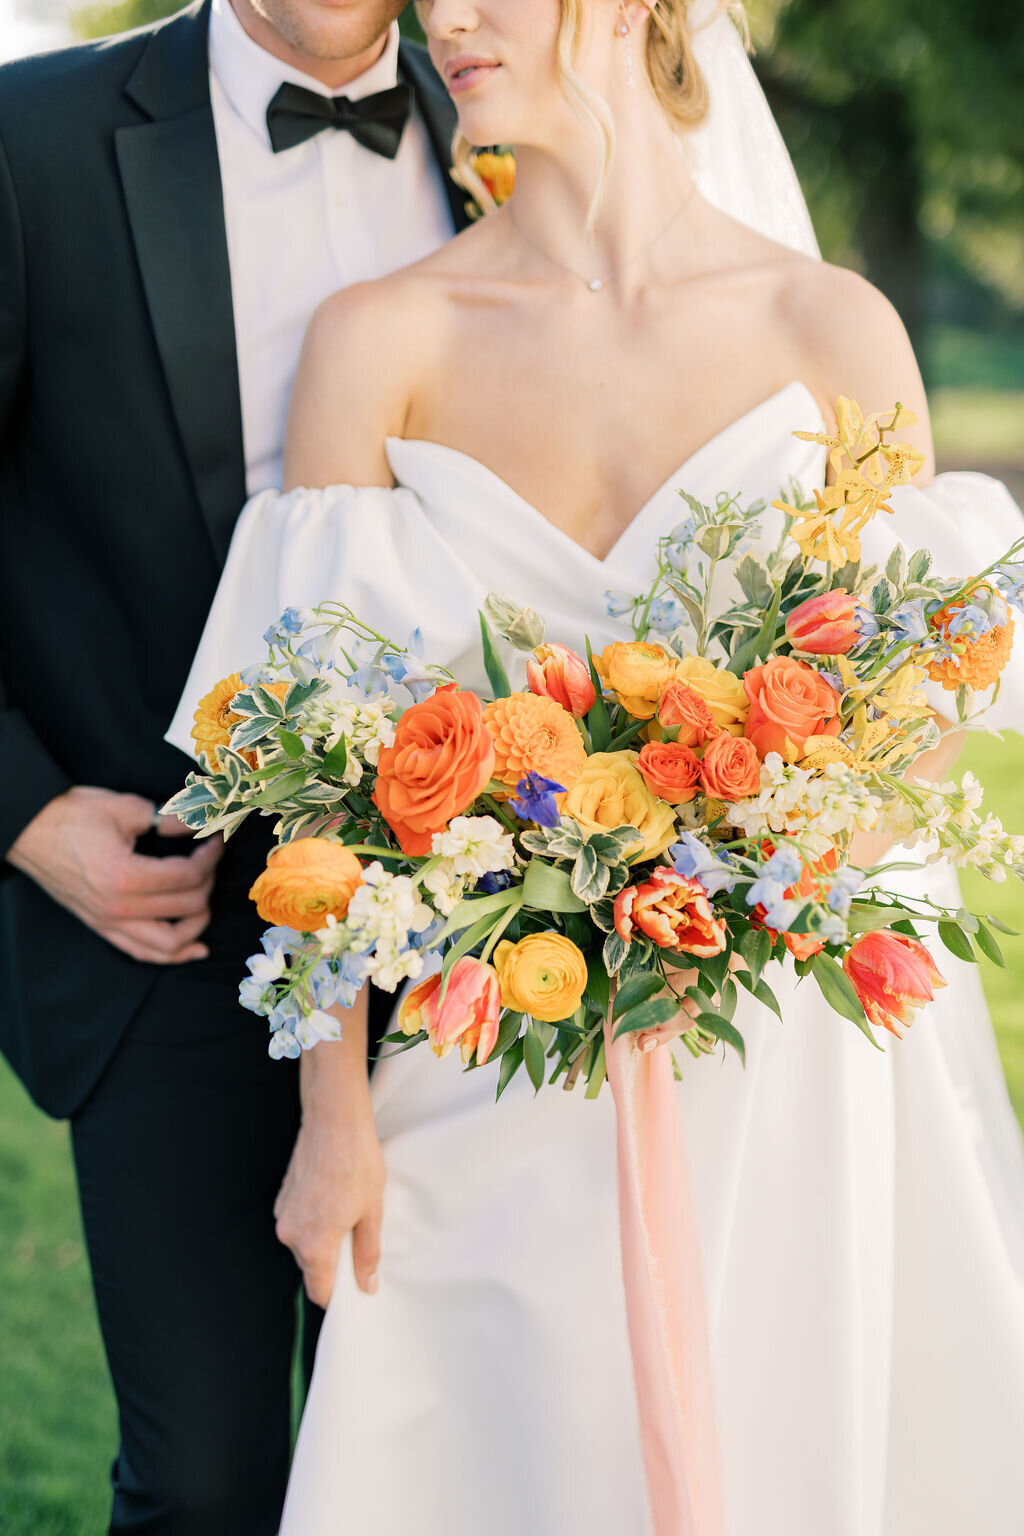 brides bouquet with orange, yellow and blue flowers